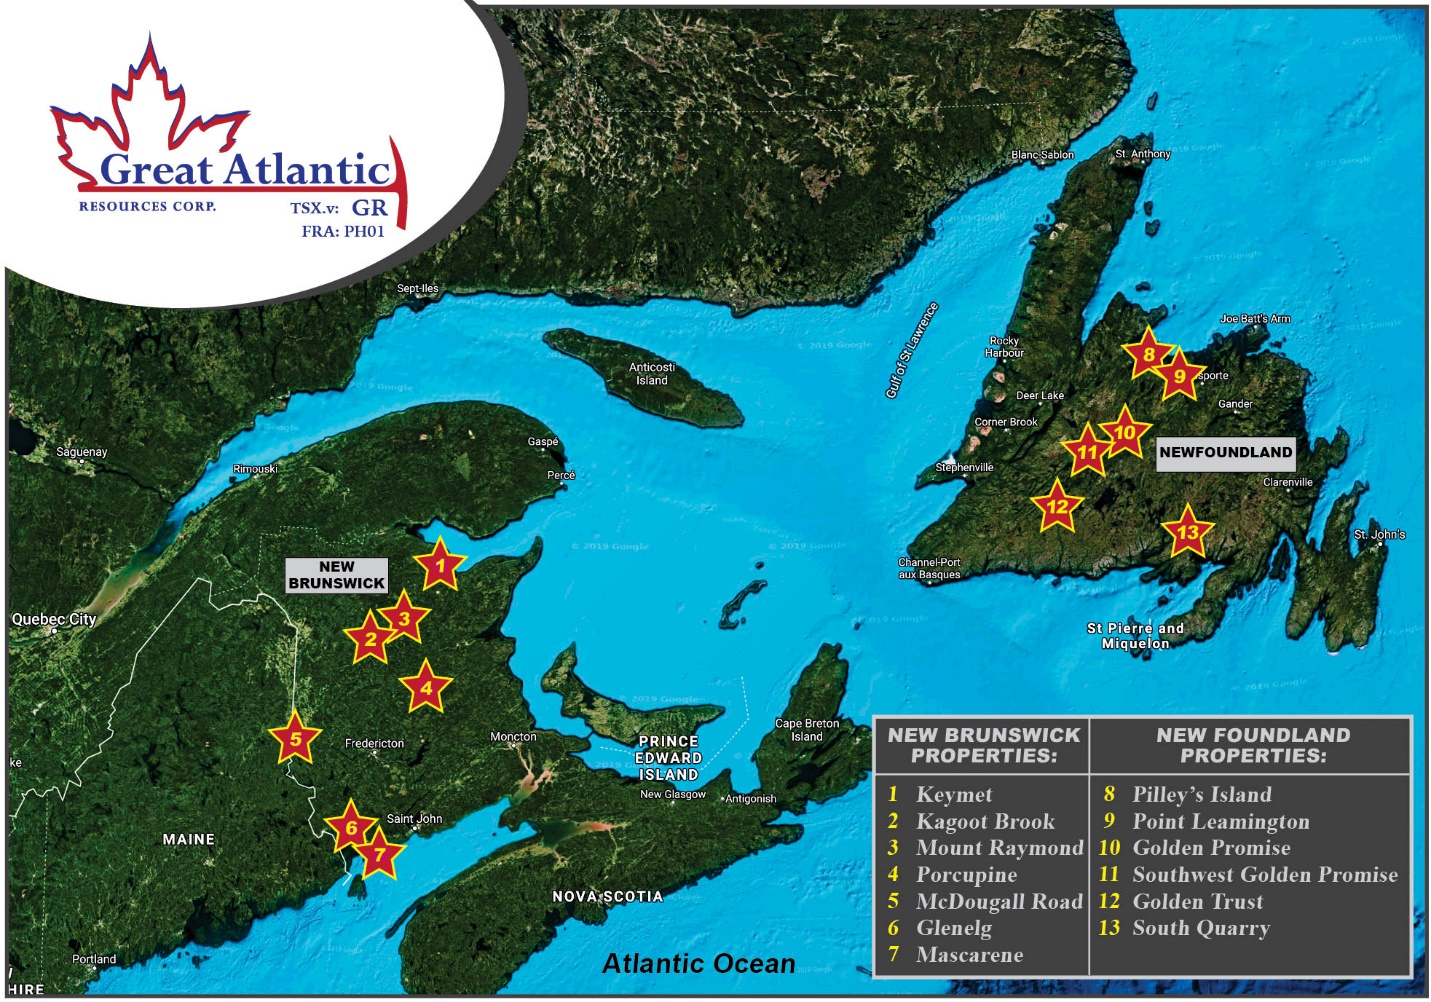 Great Atlantic Resources Corp., Tuesday, August 10, 2021, Press release picture